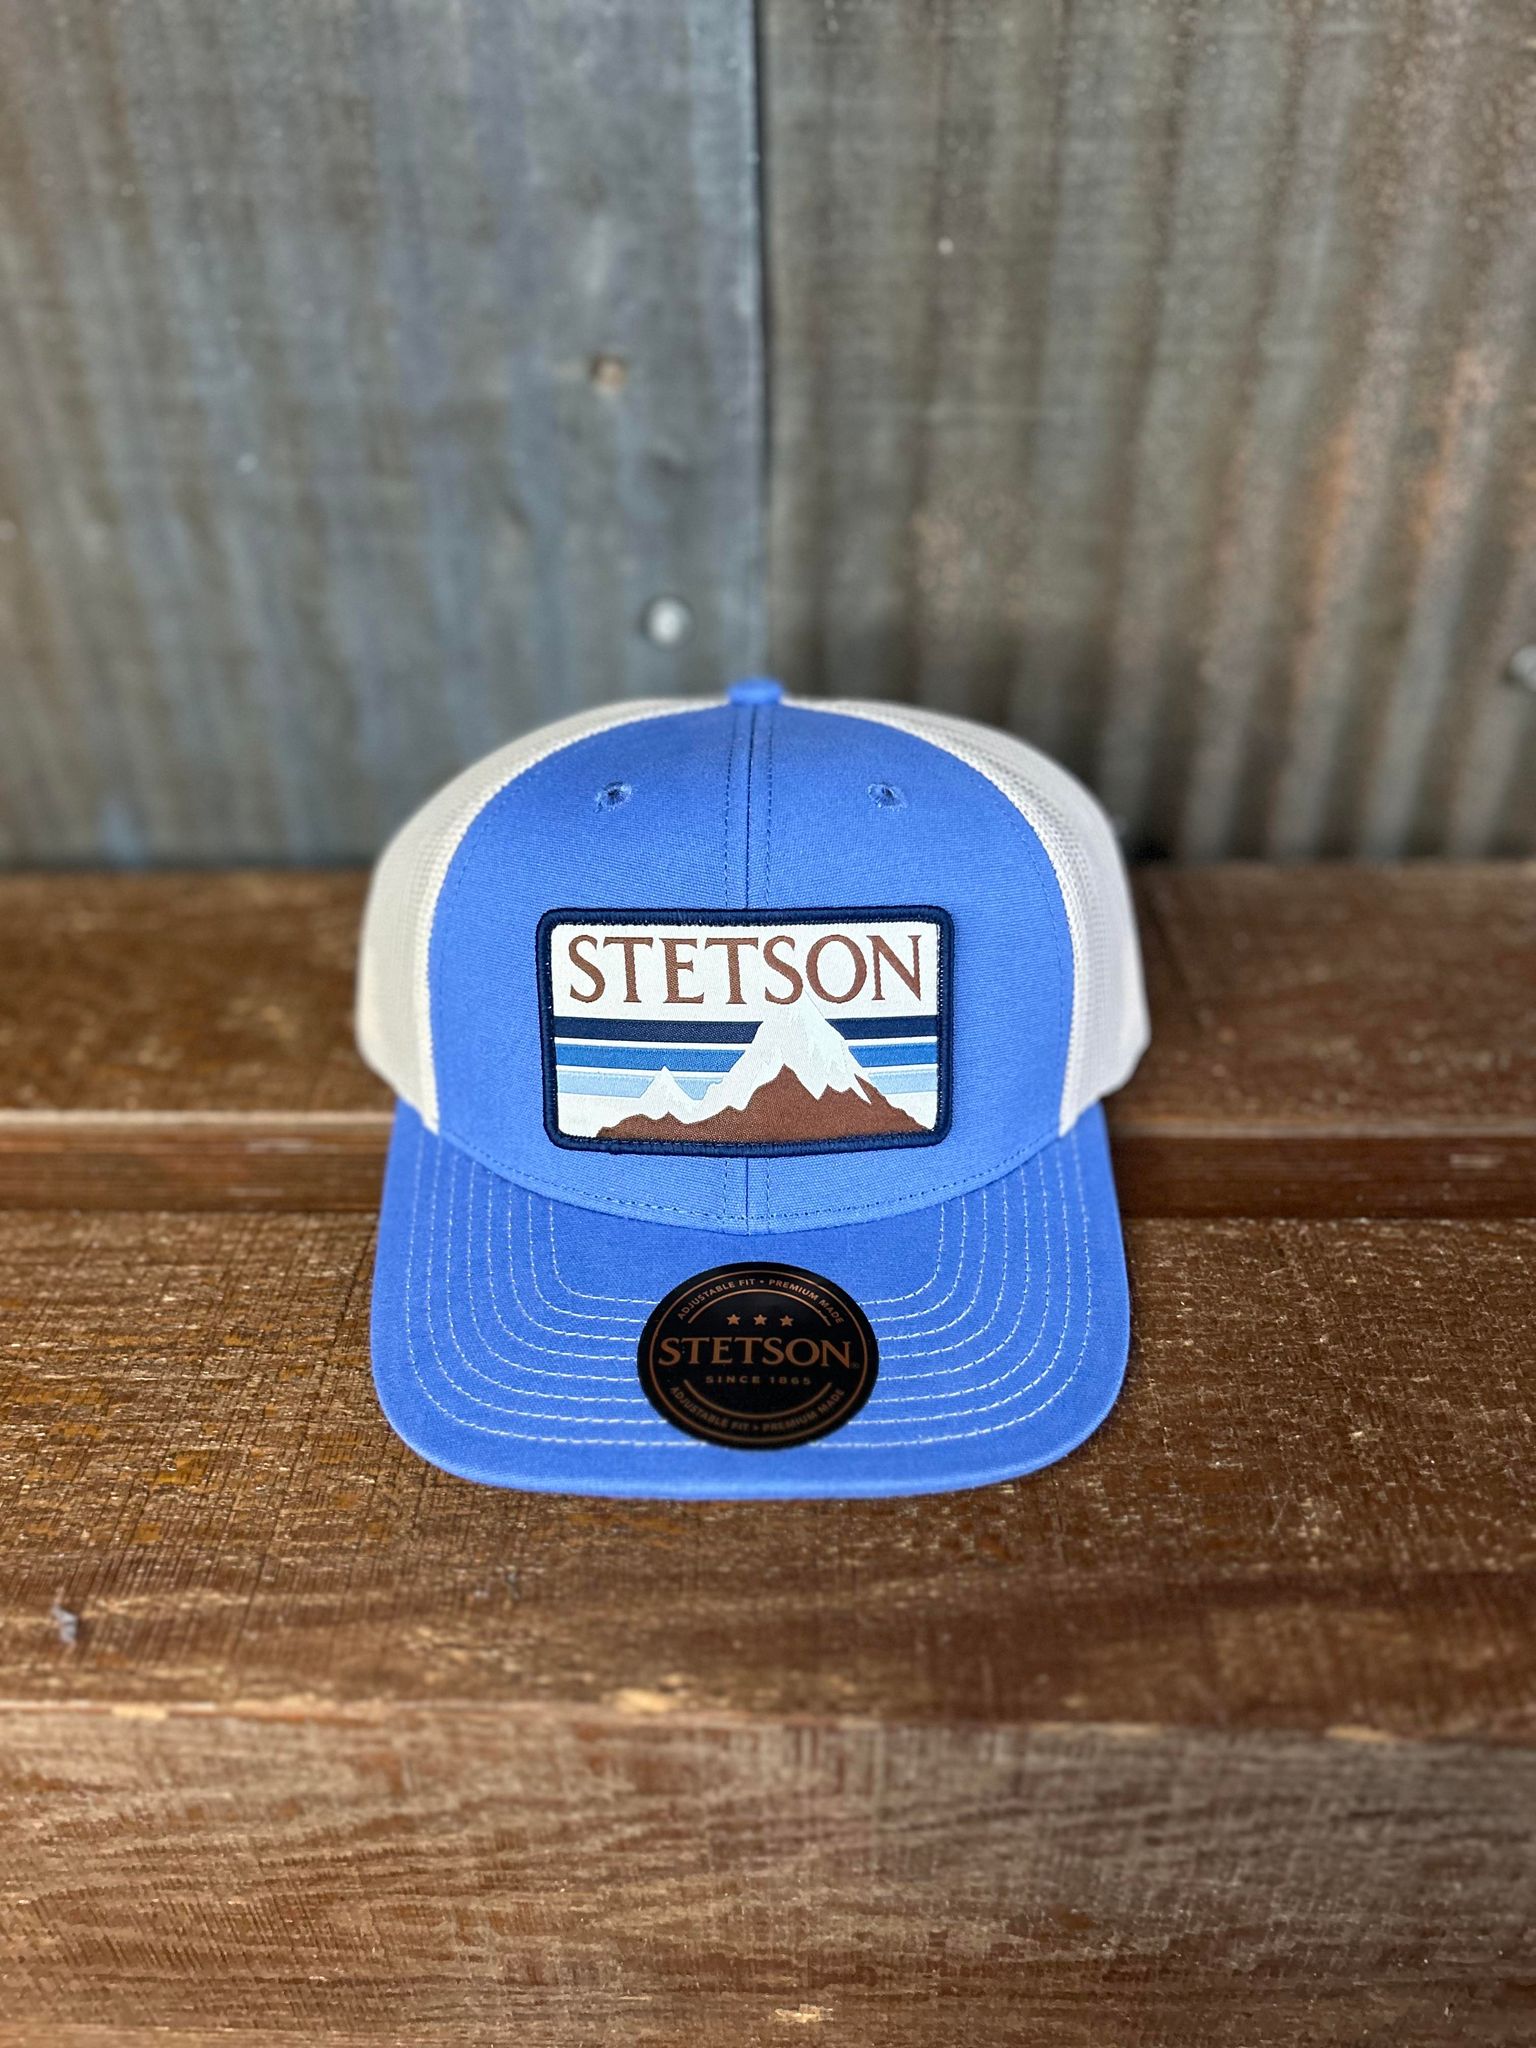 Stetson Caps-Caps-Karman-Lucky J Boots & More, Women's, Men's, & Kids Western Store Located in Carthage, MO